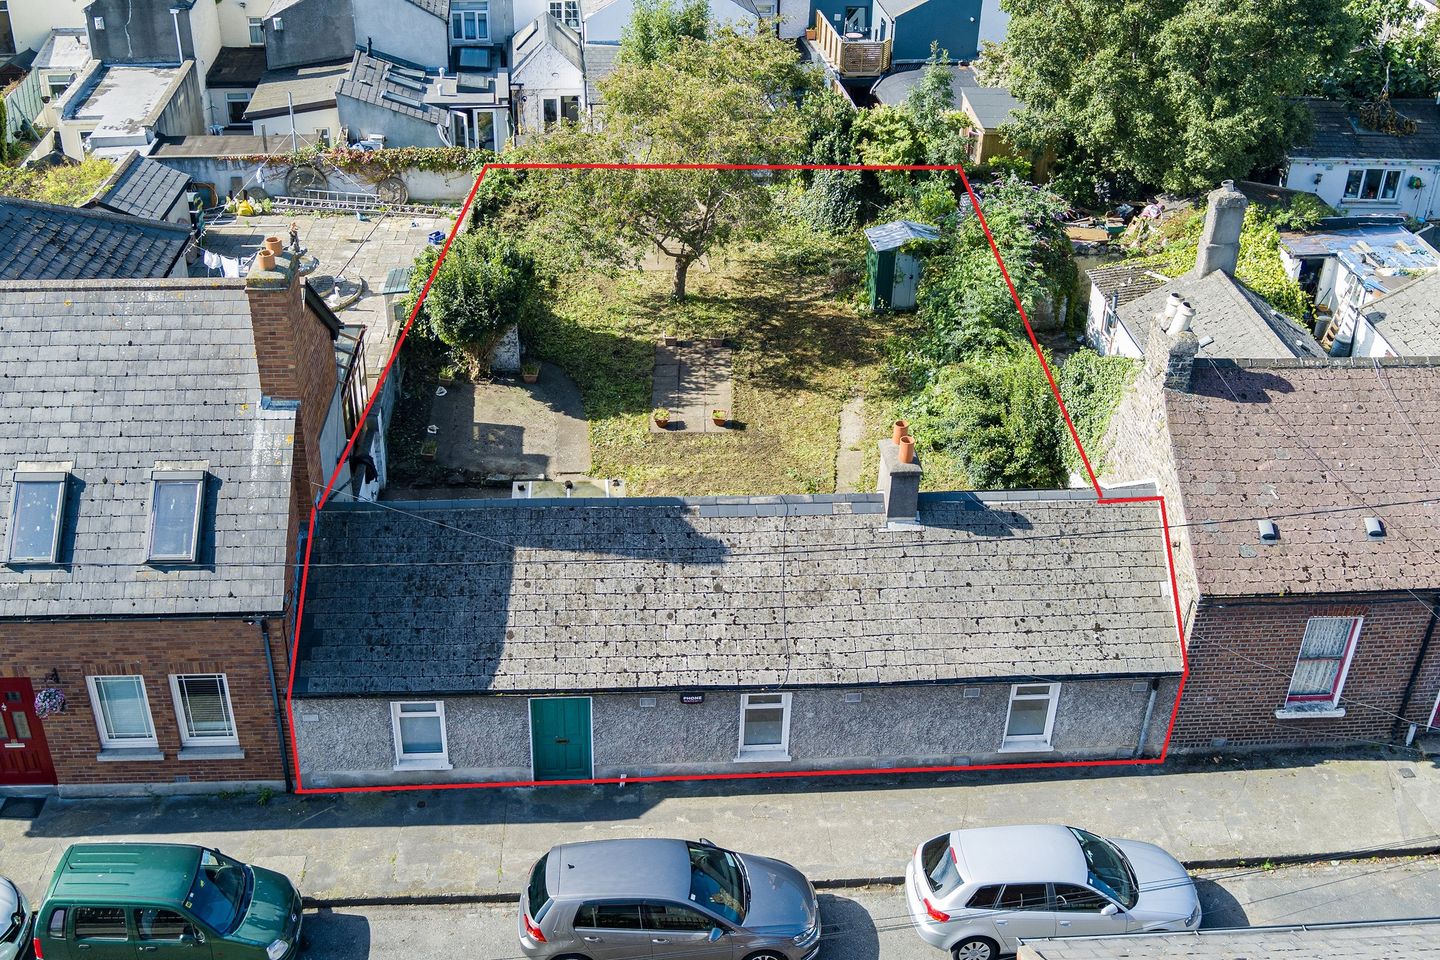 33 Bayview Avenue (with SITE POTENTIAL), North Strand, Dublin 3